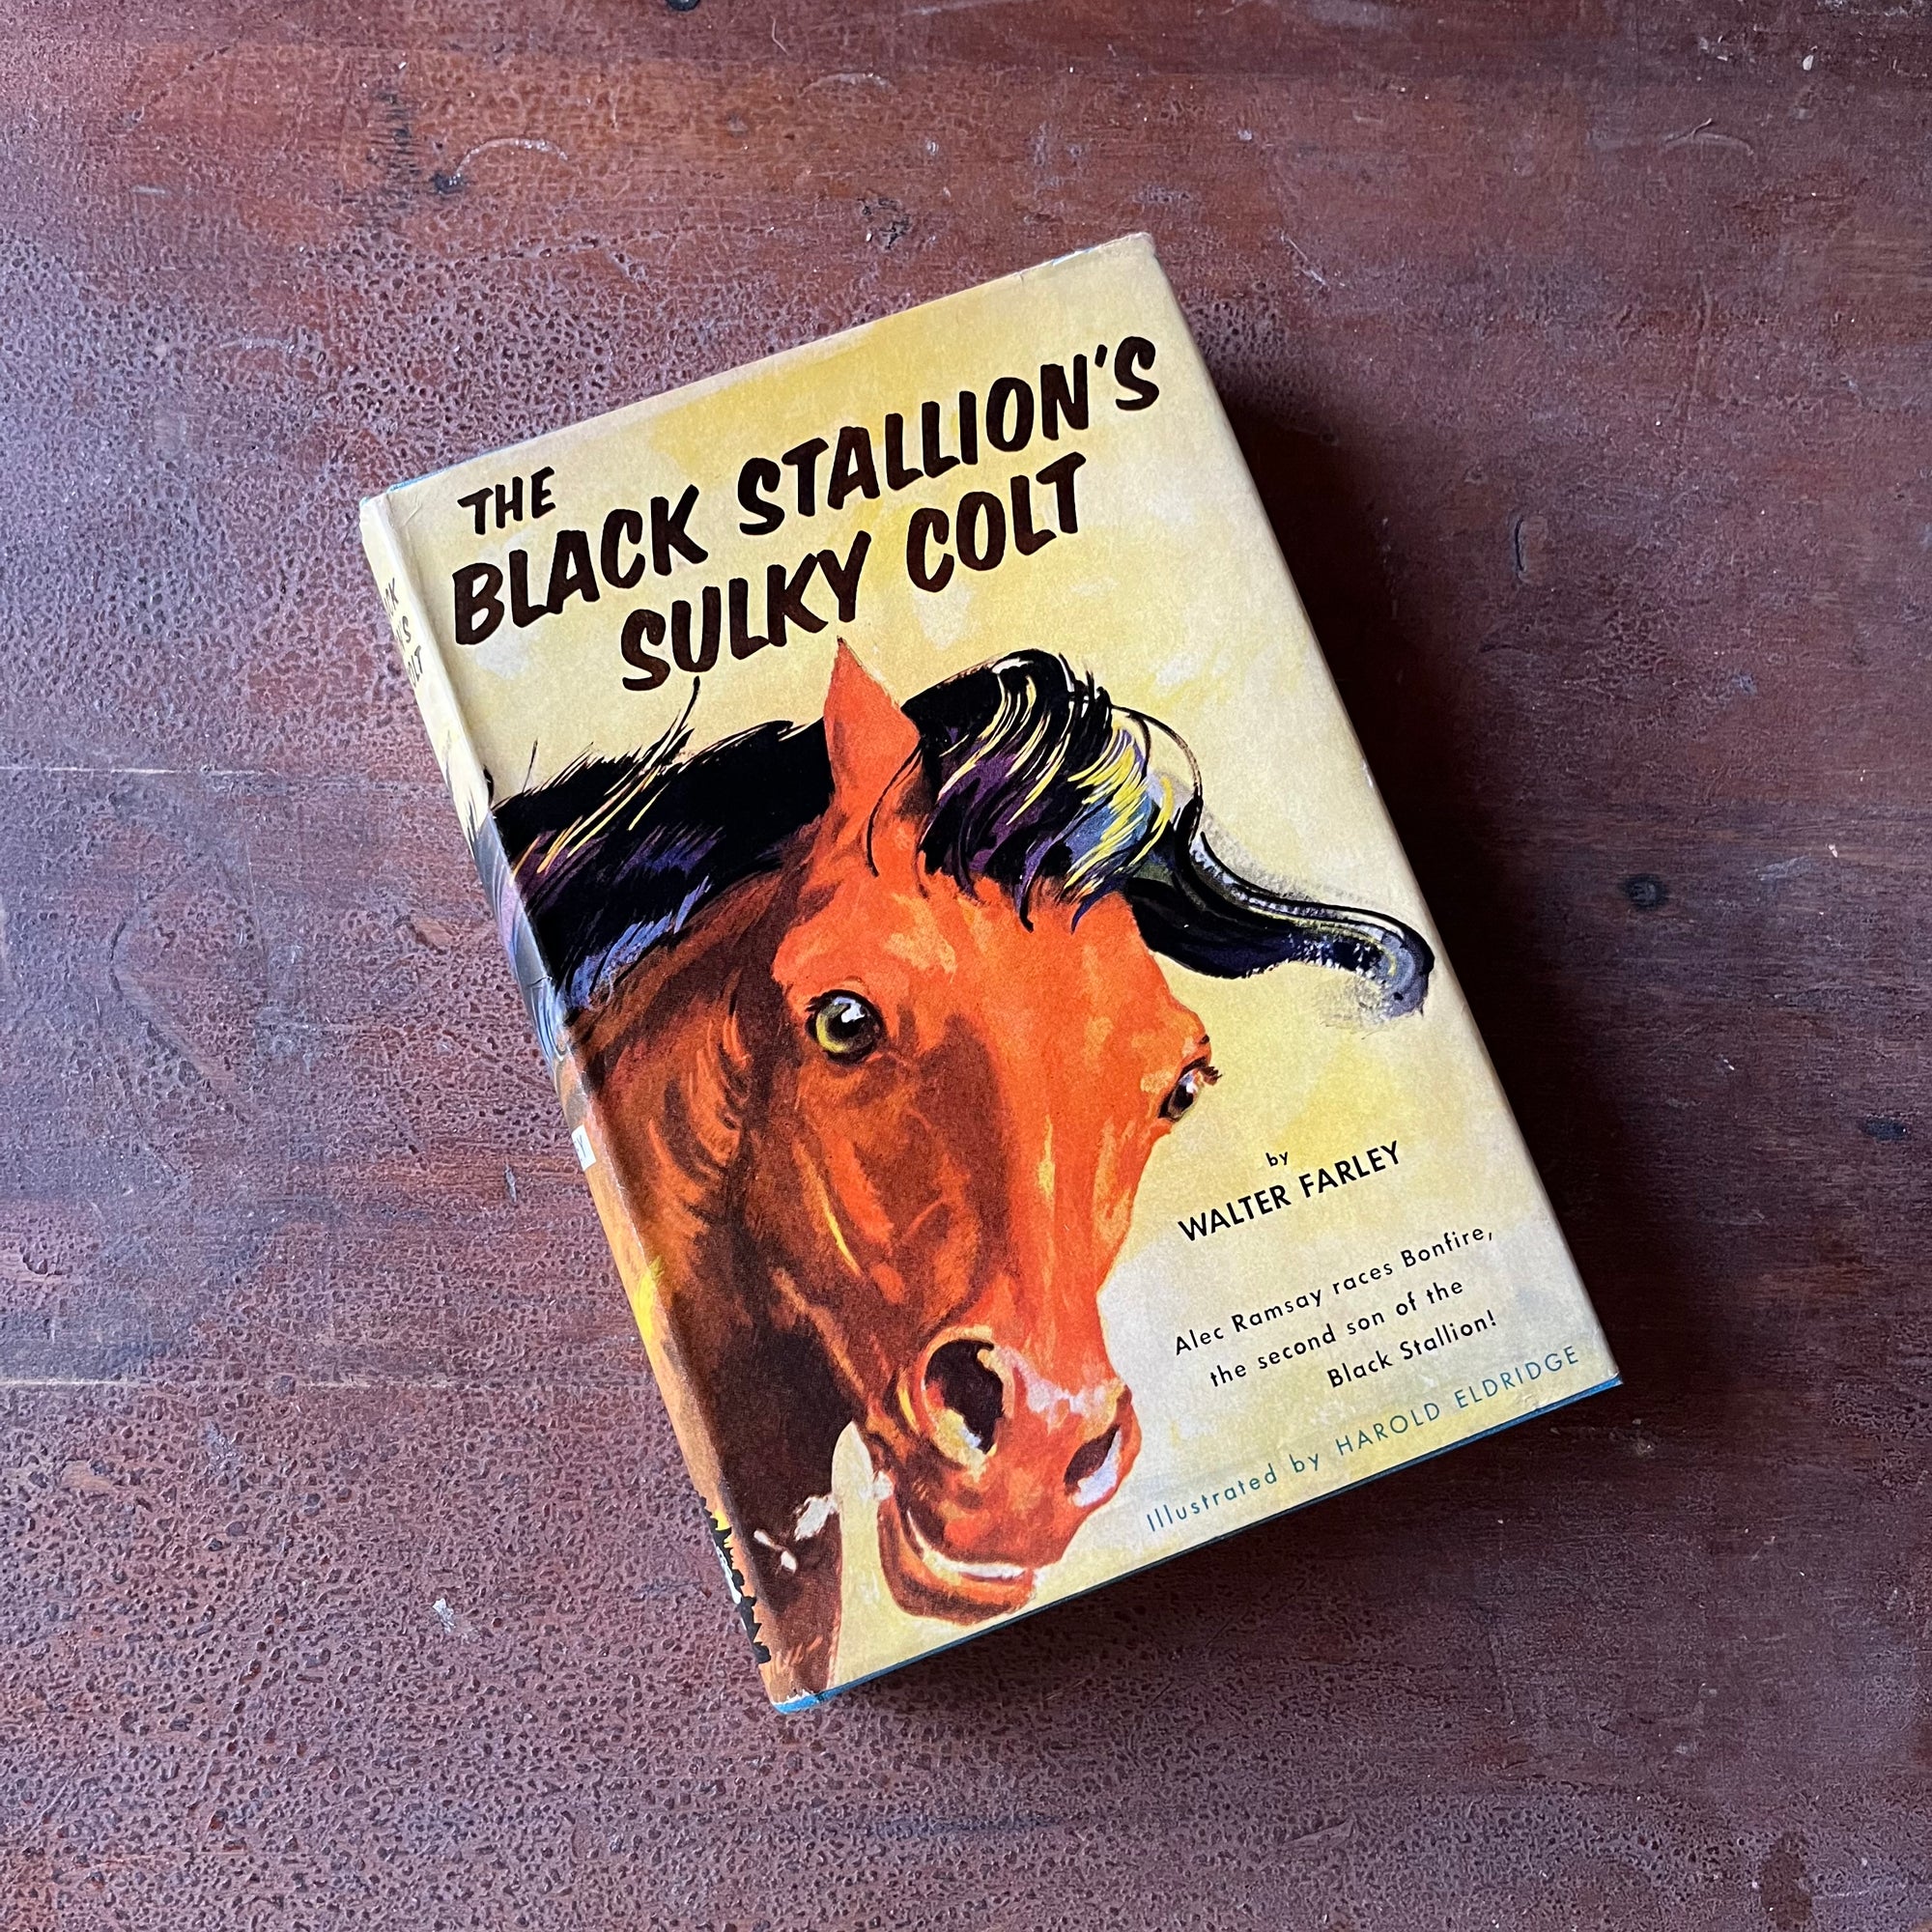 Log Cabin Vintage – vintage children’s book, children’s book, chapter book, The Black Stallion Series - The Black Stallion's Sulky Colt by Walter Farley with Illustrations by Harold Eldridge - view of the dust jacket's front cover